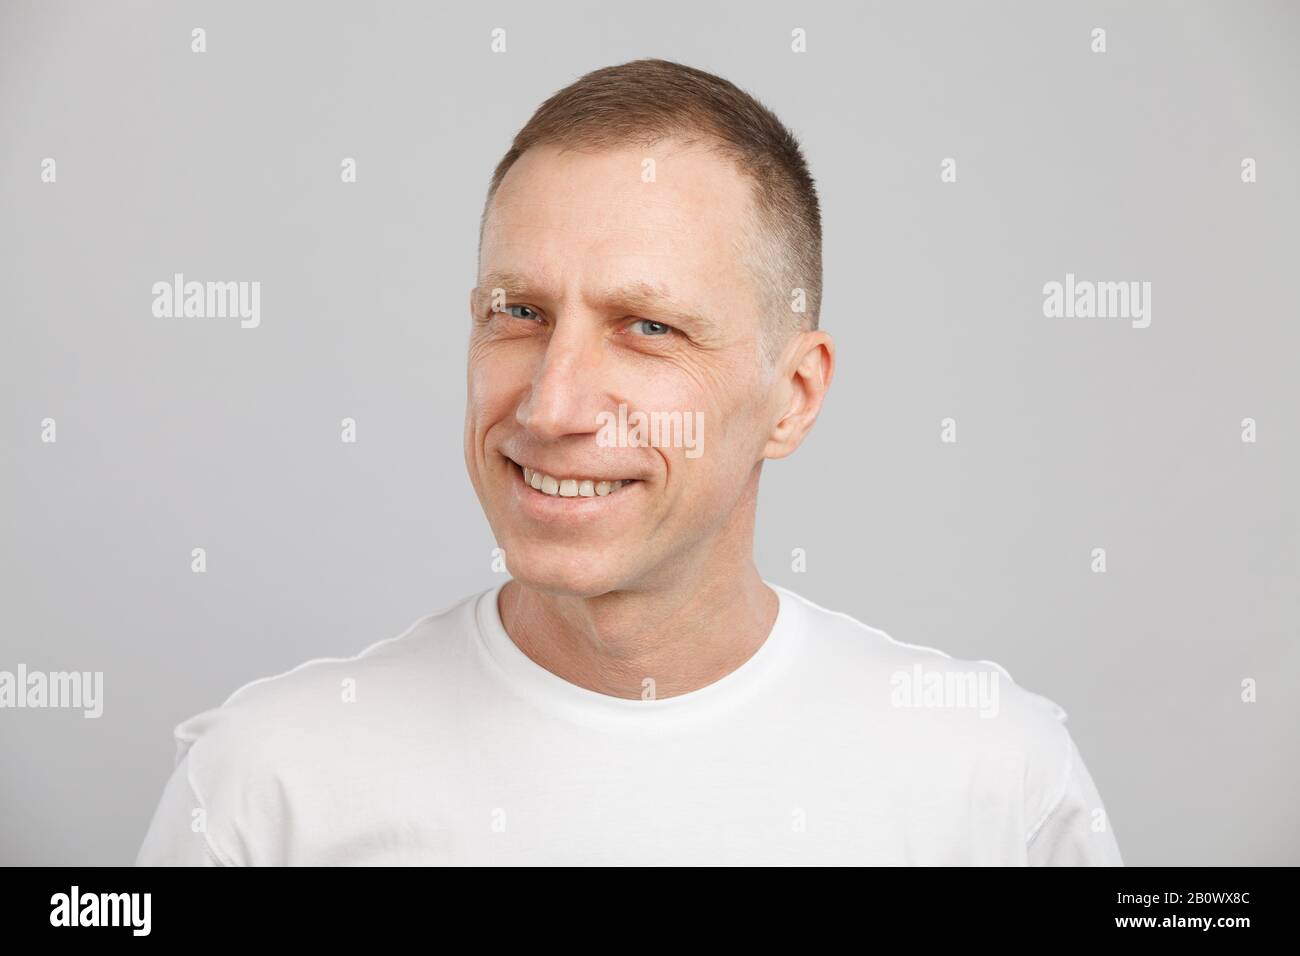 Middle-aged smiling man headshot in a white t-shirt. Stock Photo